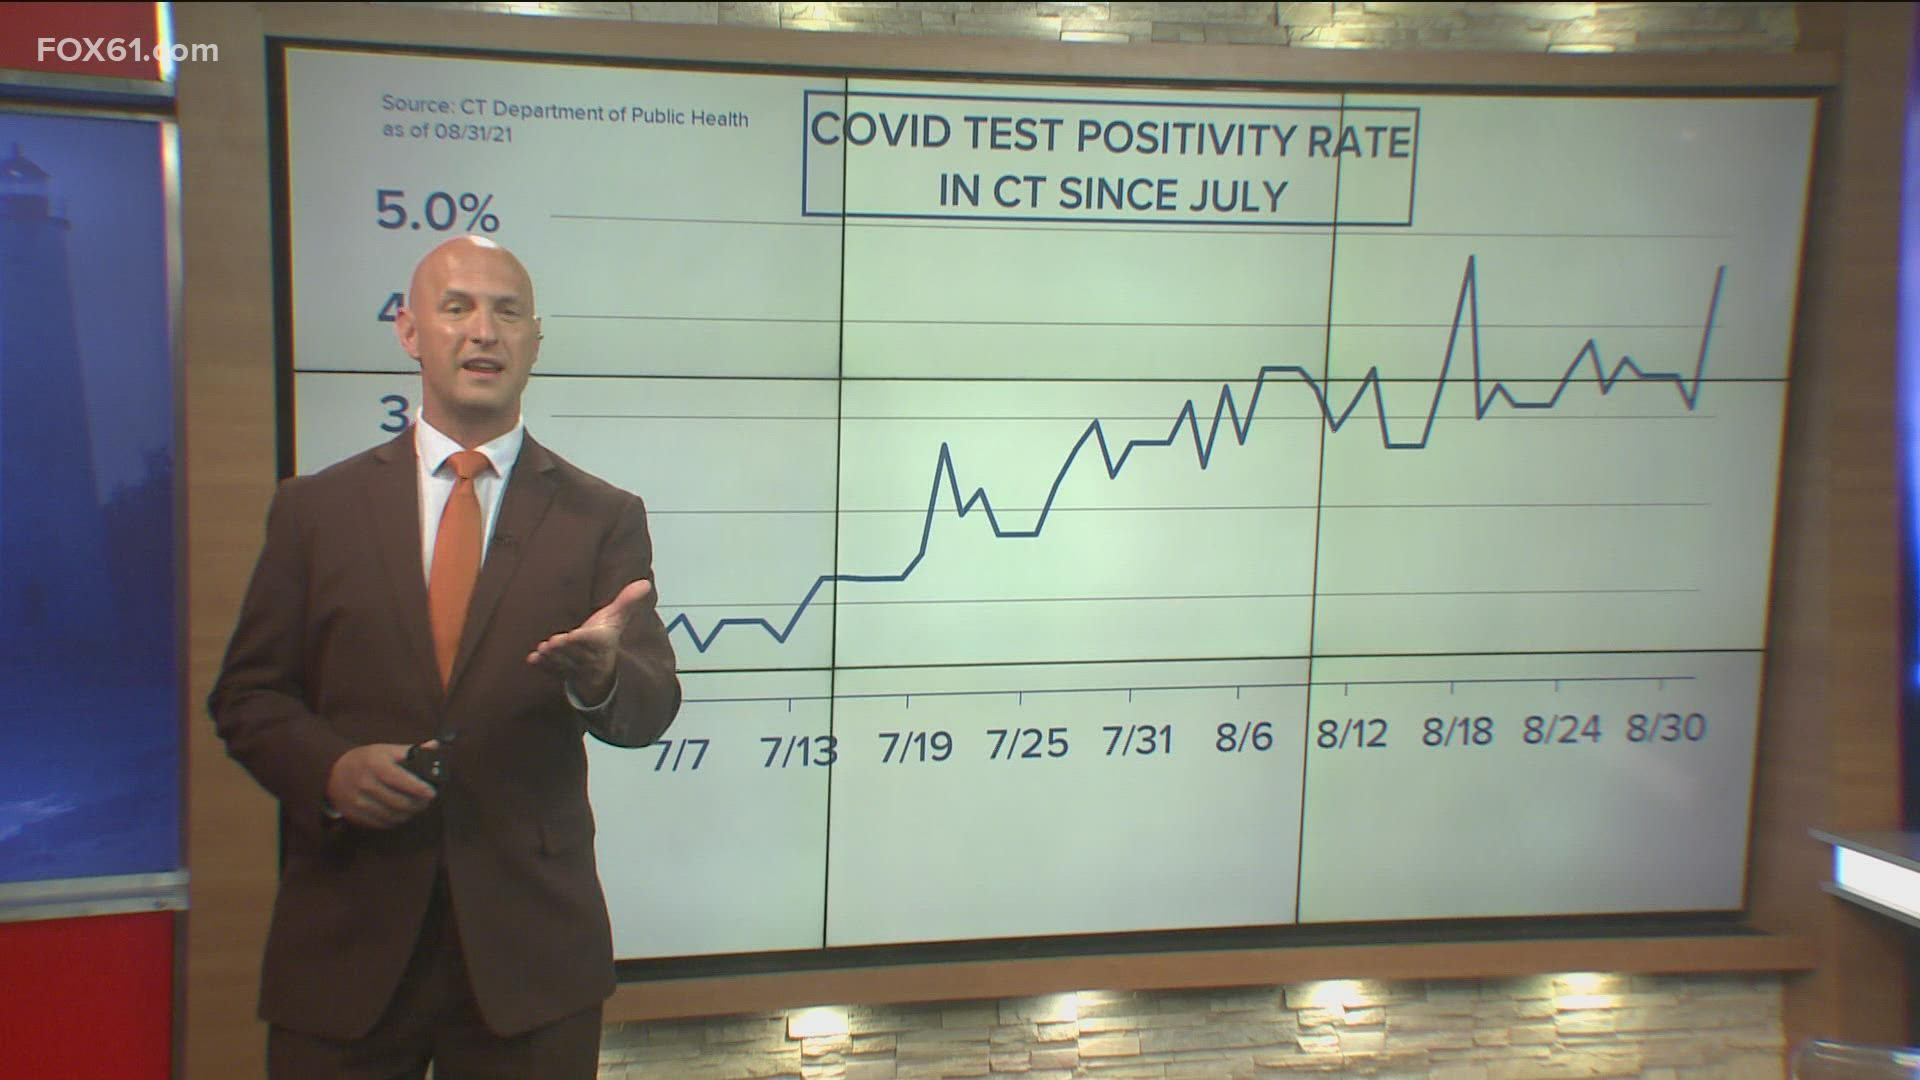 Test positivity rate has stabilized despite Tuesday's jump.